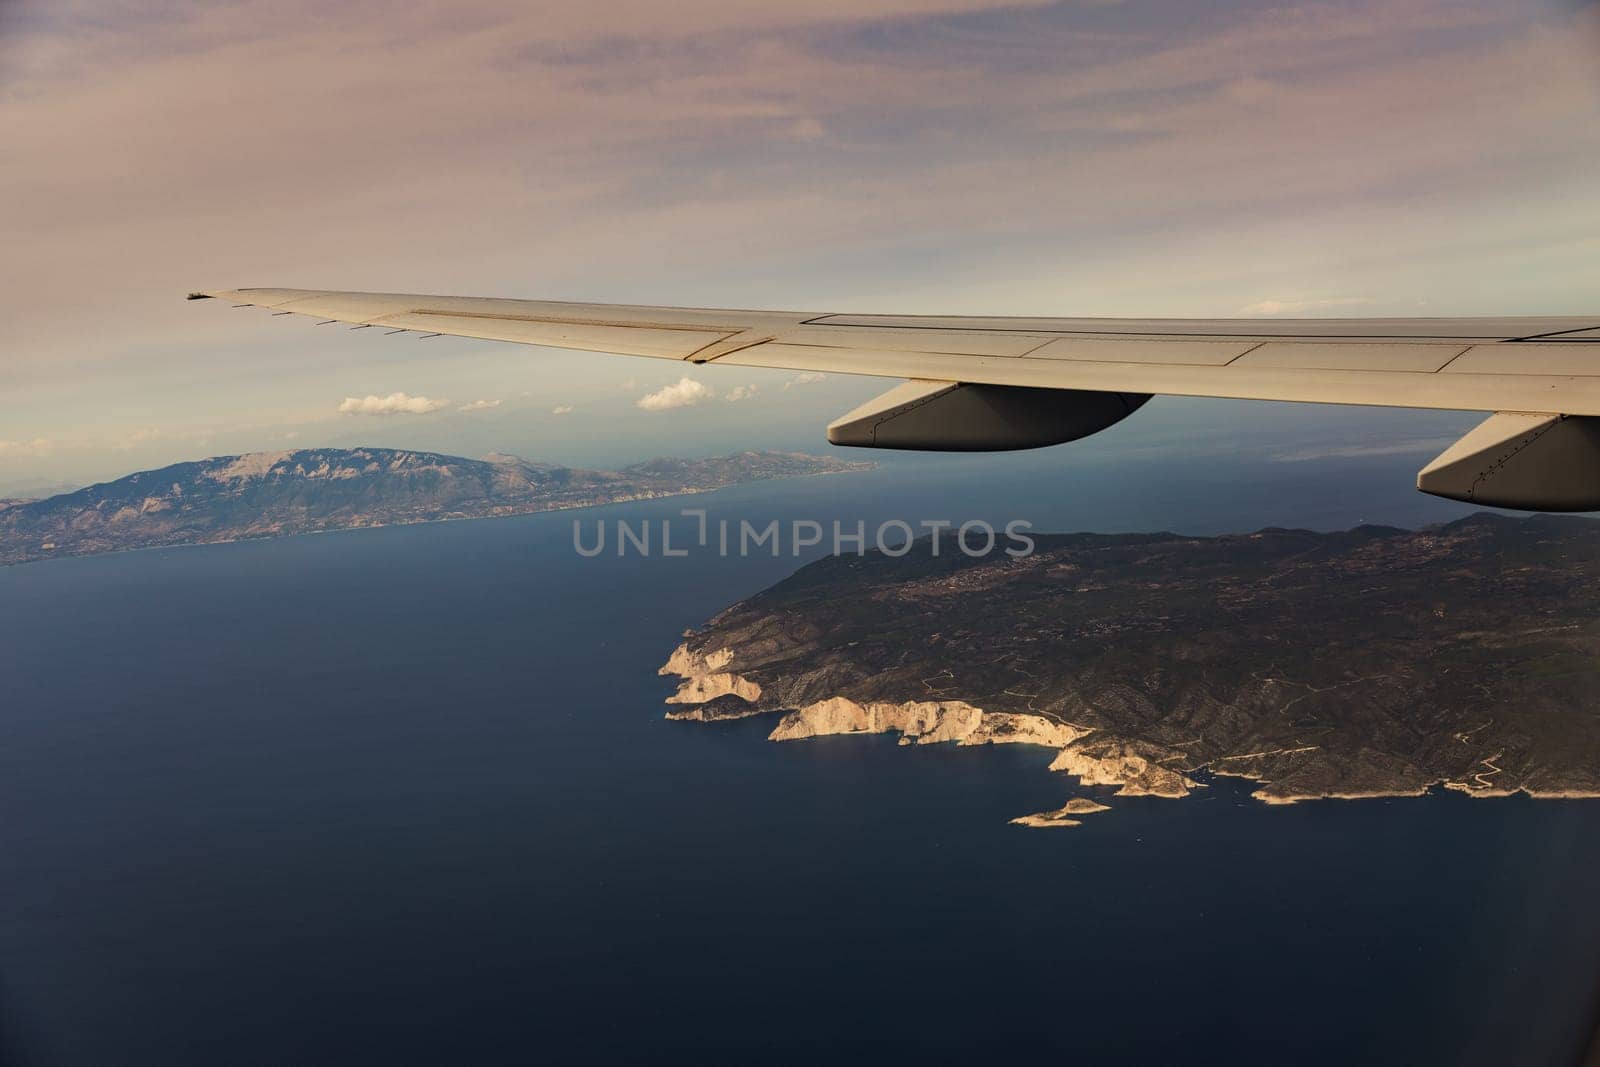 A beautiful view of the wing of an airplane and an island in the sea through the porthole window from the height of an airplane in the evening at sunset, close-up side view.